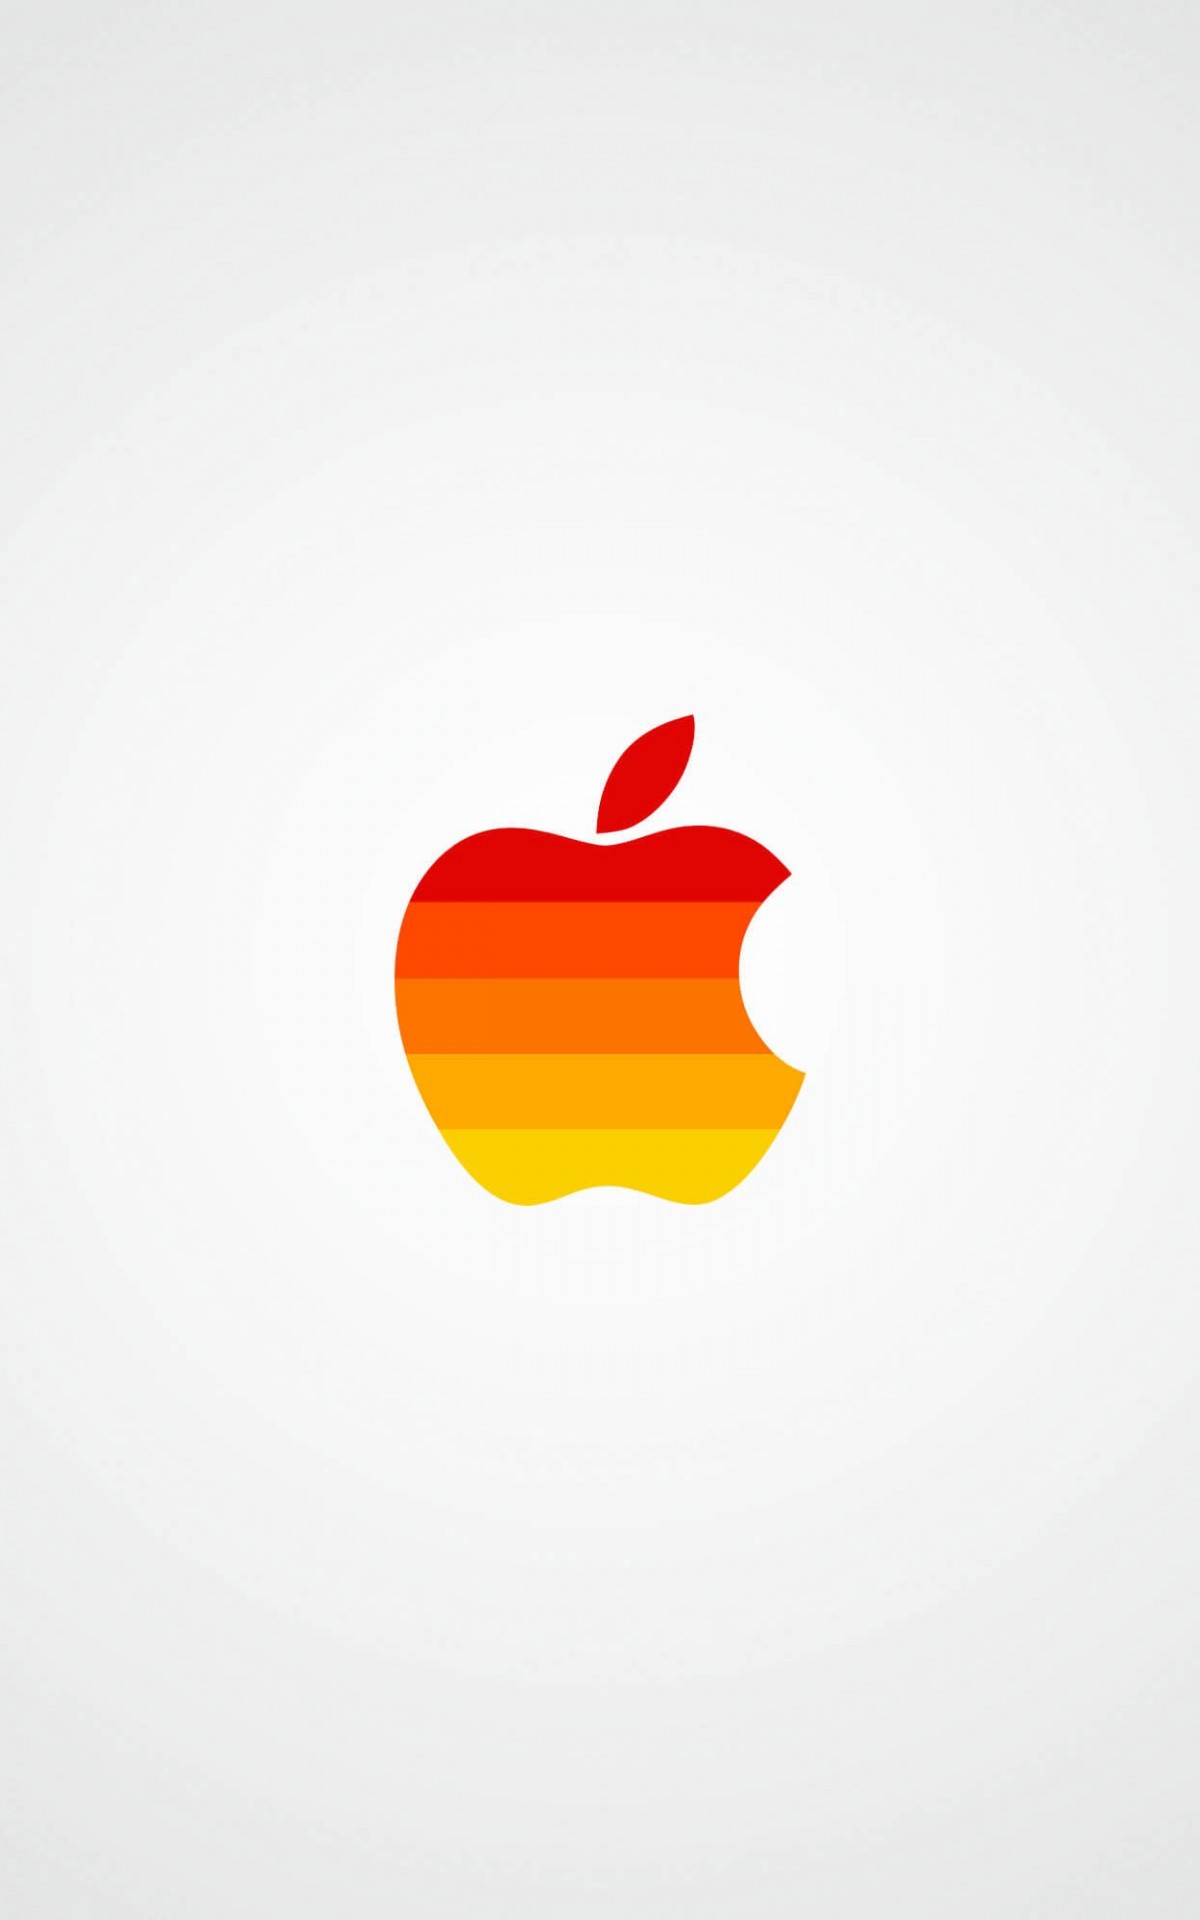 Clear Apple Wallpaper for Amazon Kindle Fire HDX